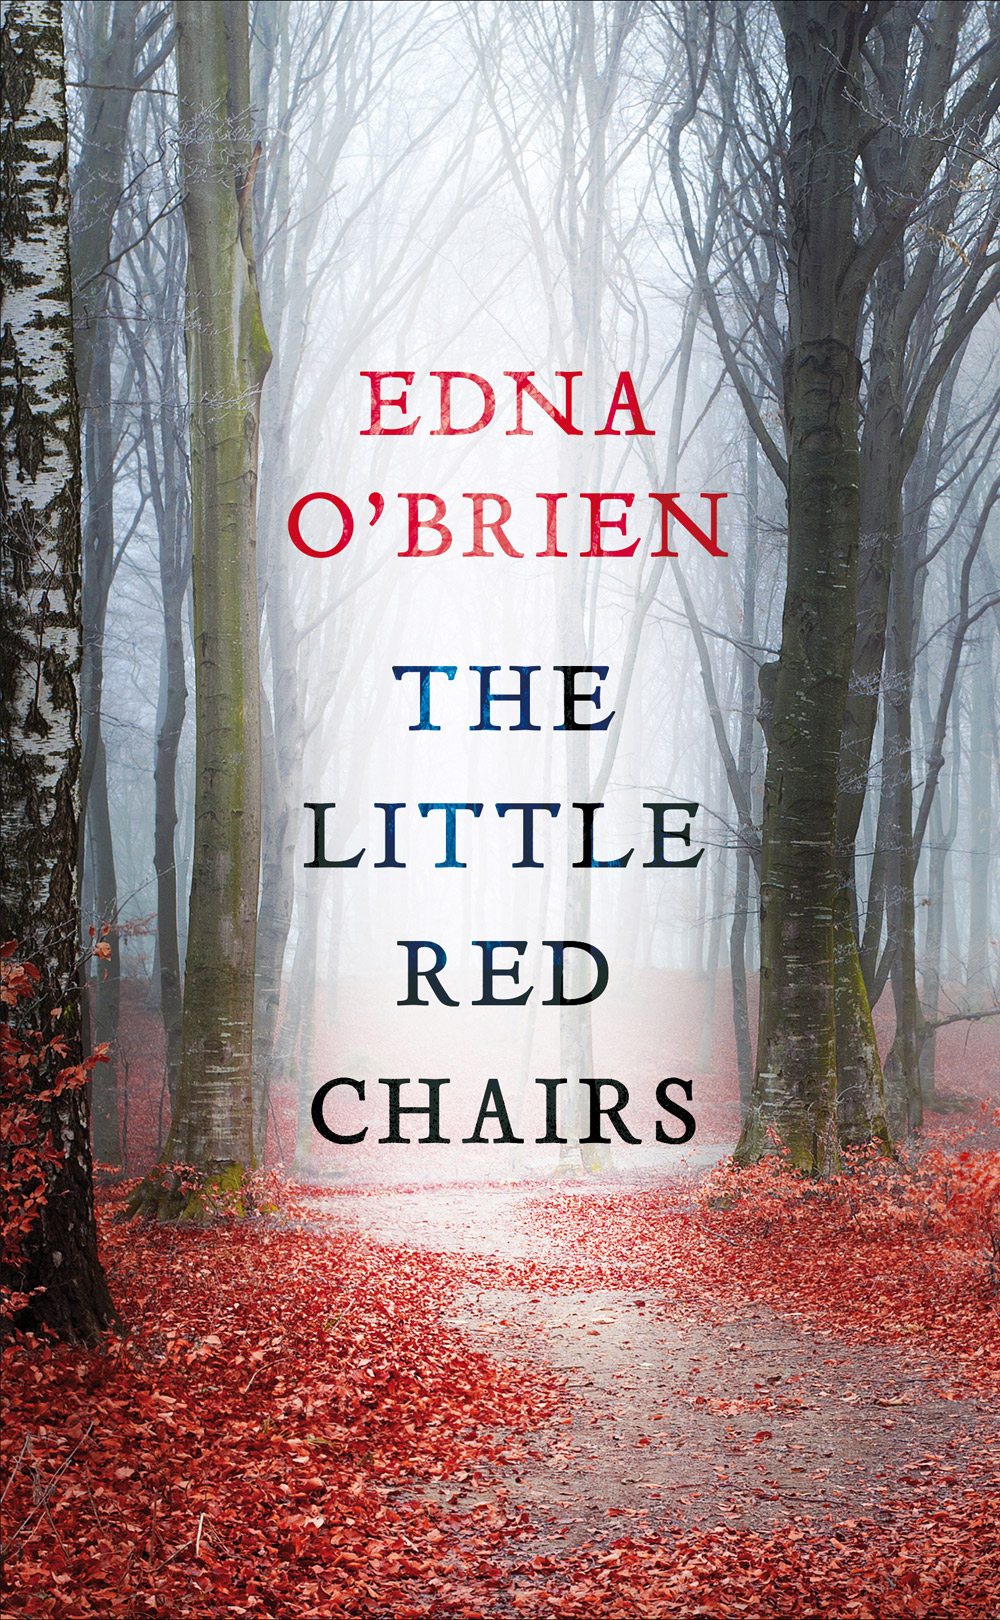 The Little Red Chairs, by Edna O’Brien, published by Allen & Unwin, $29.99. 